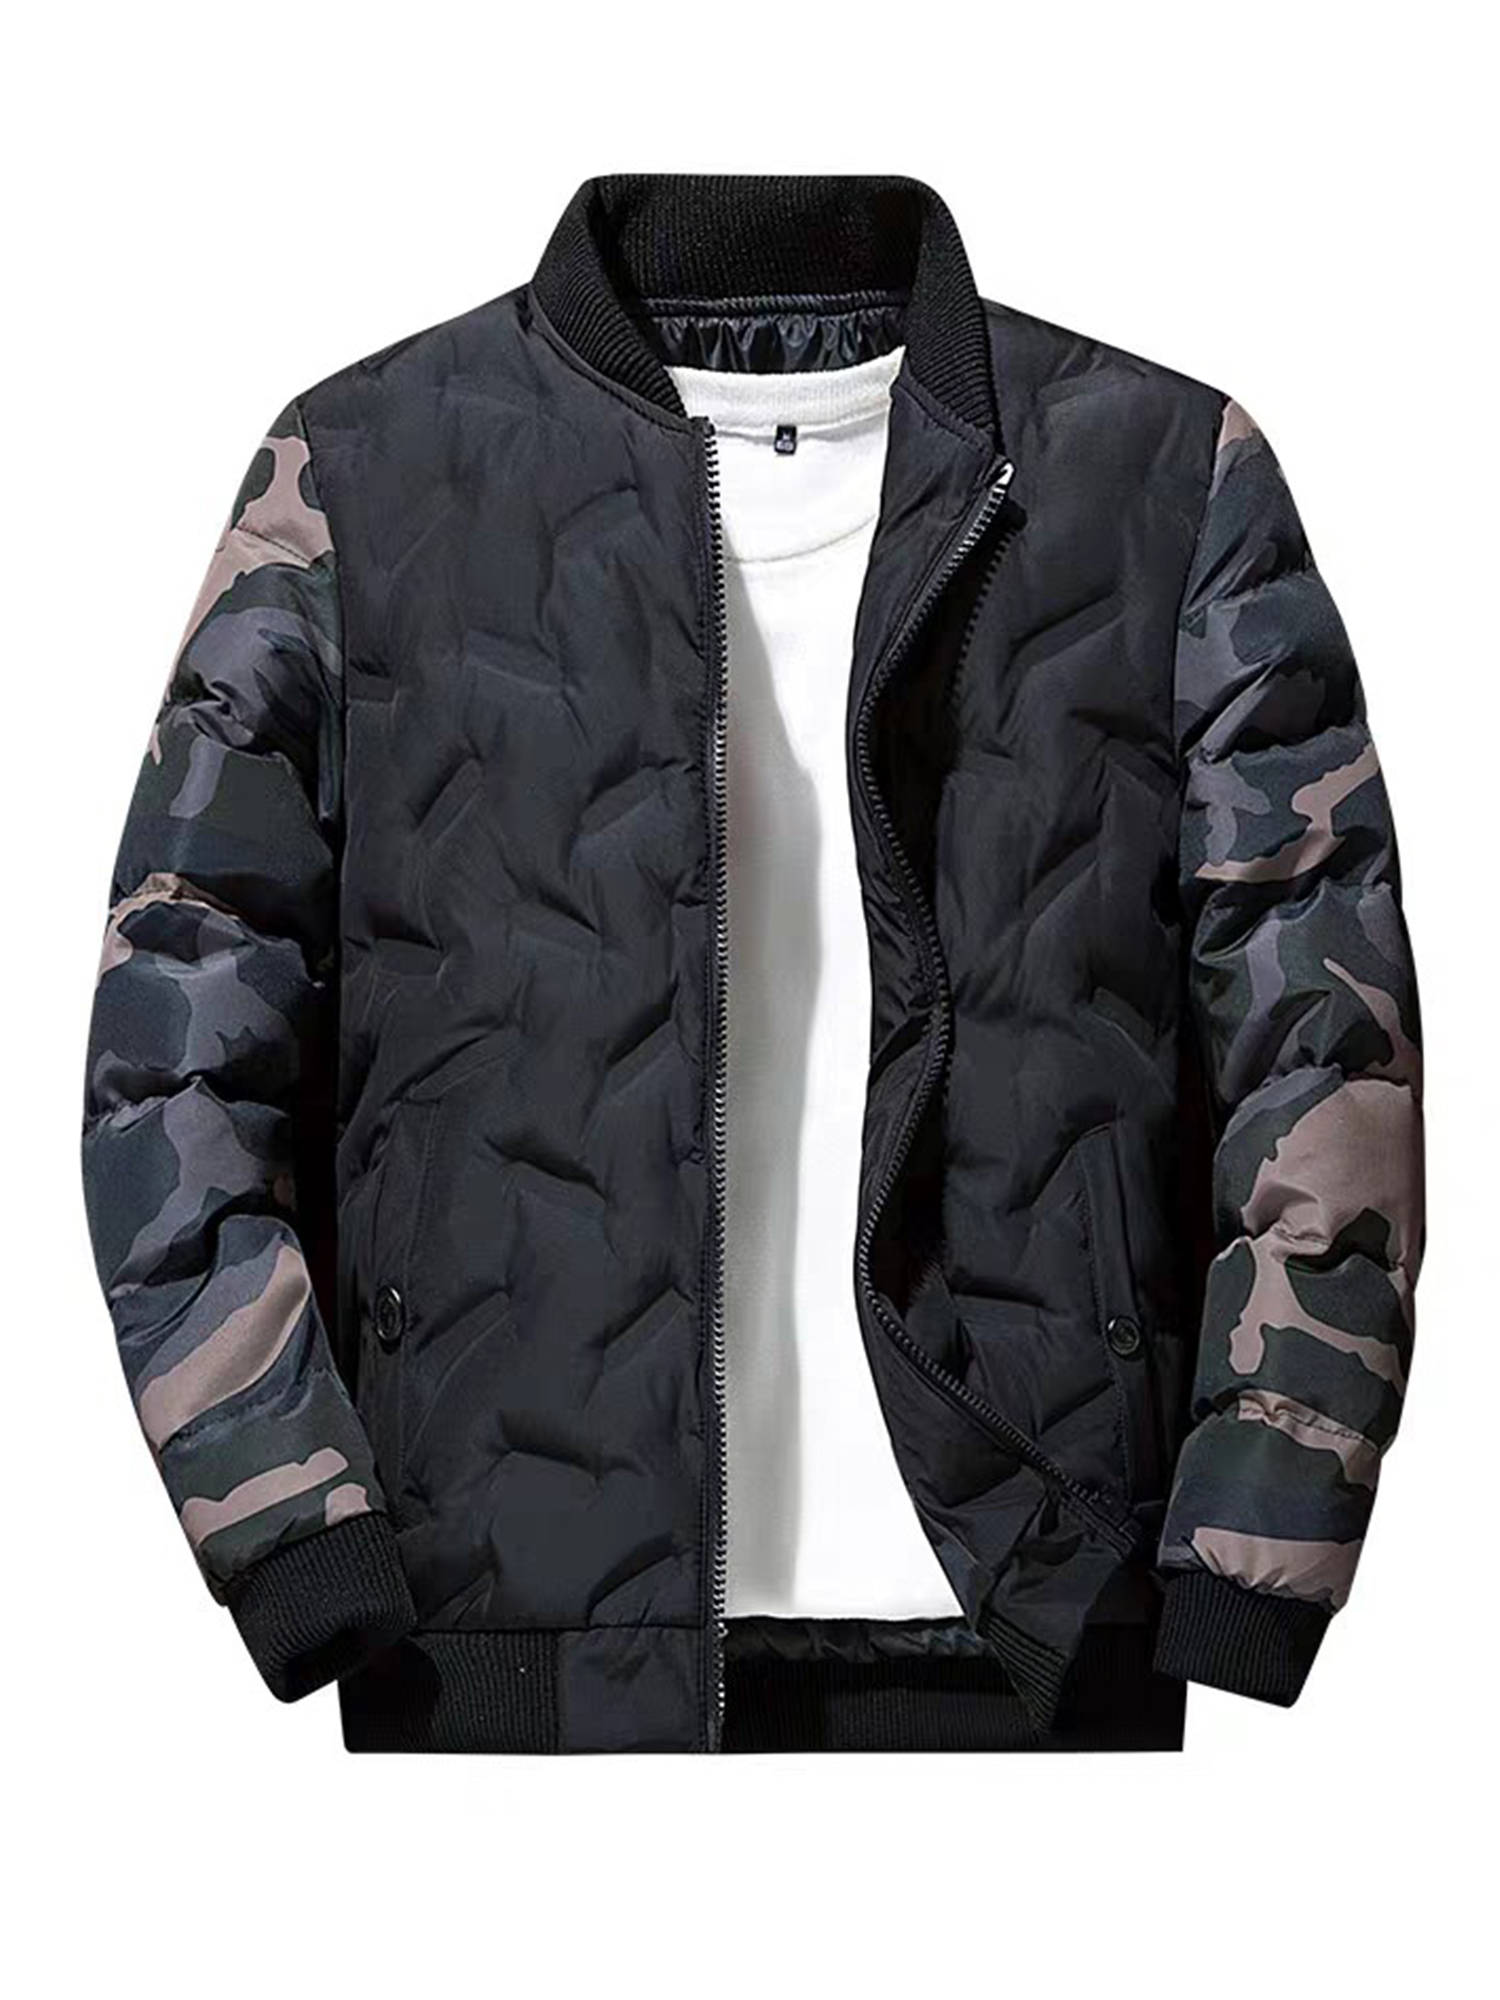 UKAP Mens Plus Size Insulated Letterman Jacket Thickened Varsity Jacket with Camo Sleeves Stand Collar for Winter Outerwear - image 4 of 6